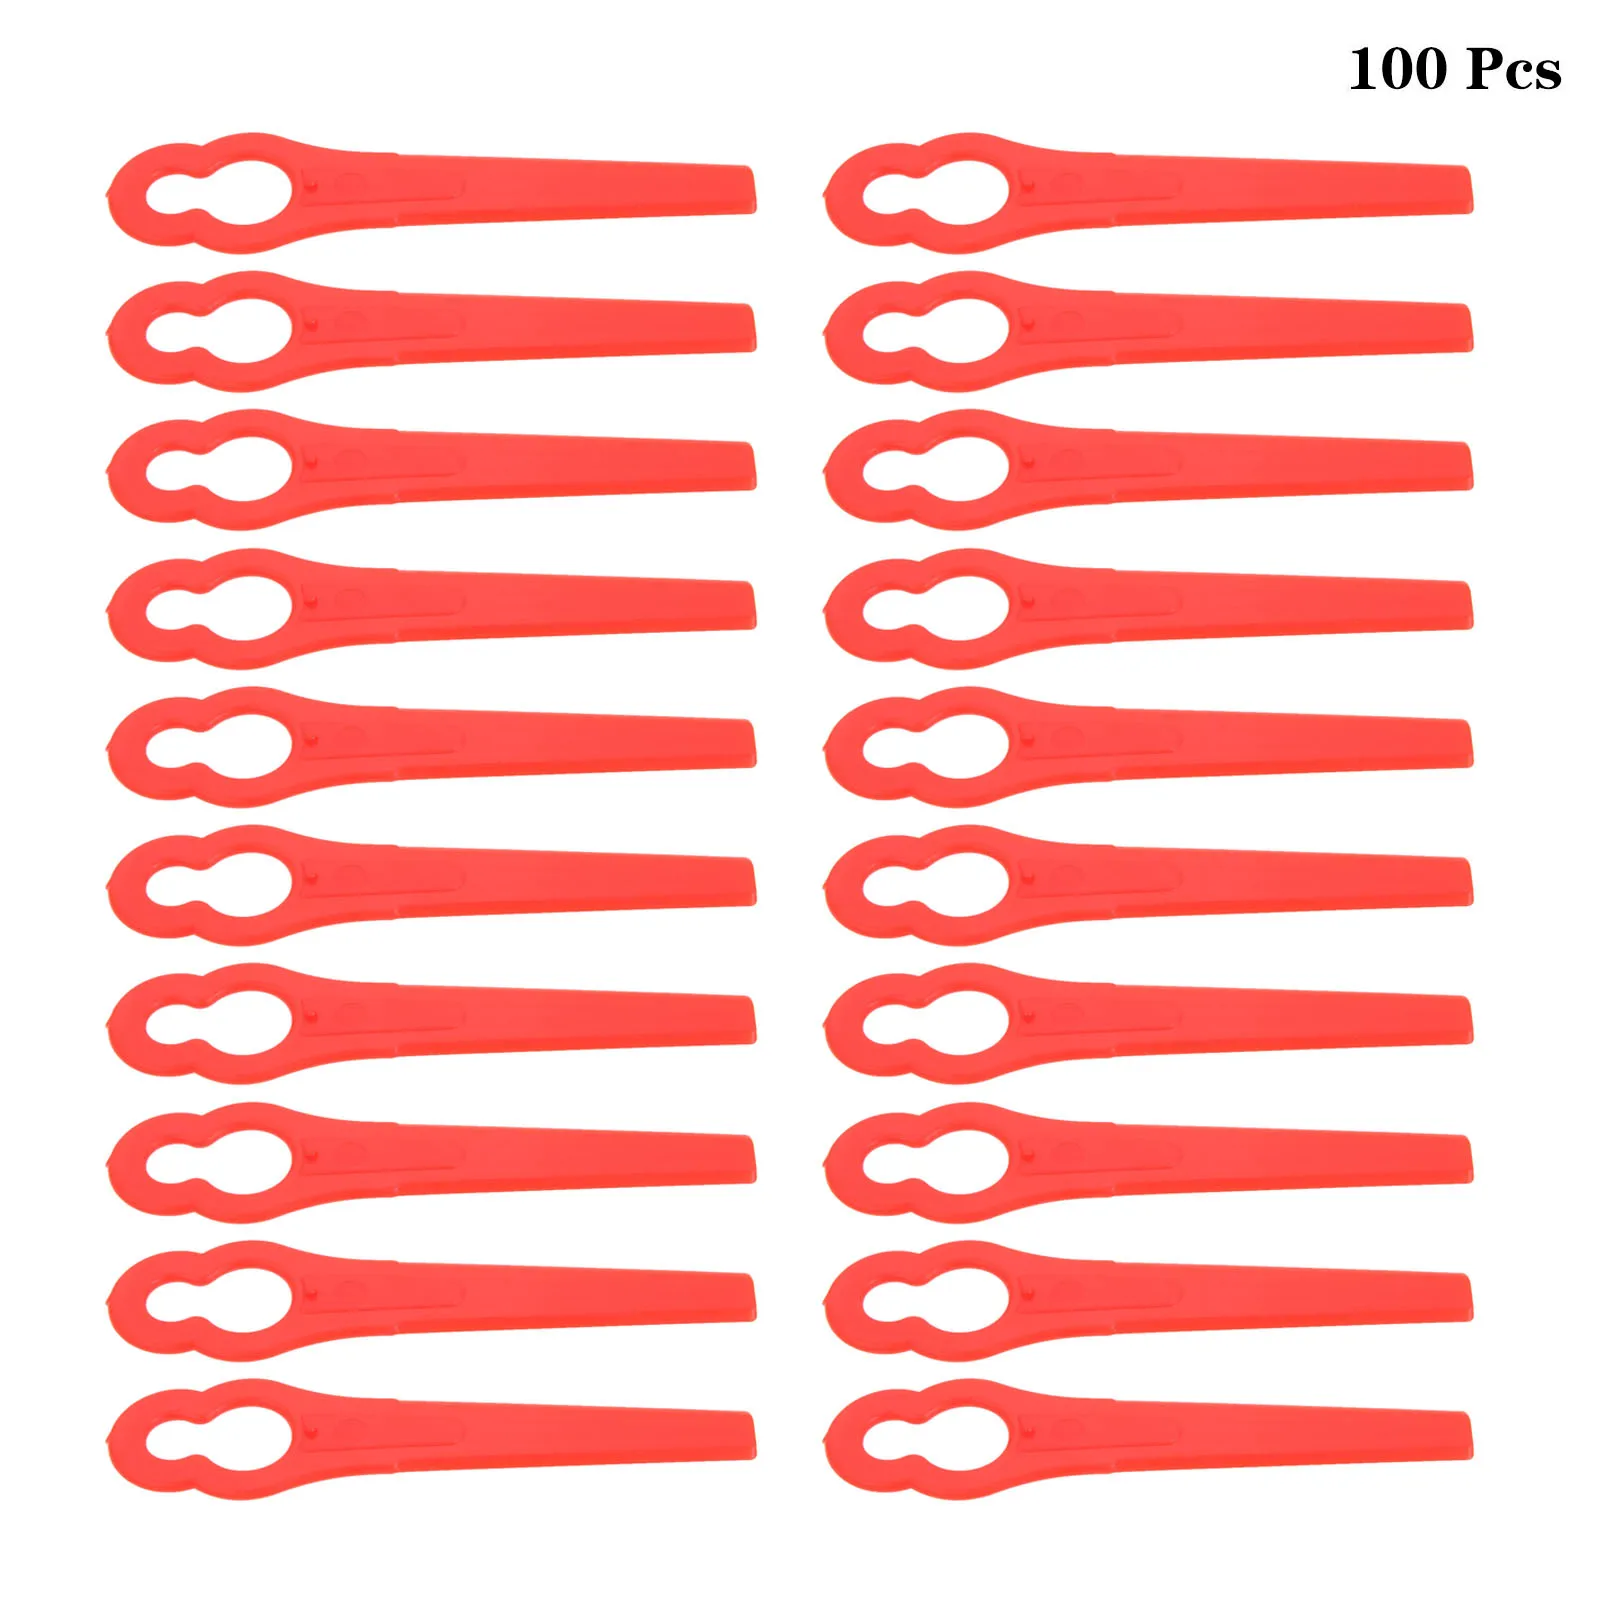 

100Pcs Trimmer Head Blades Lawn Mower Cutter Blades Plastic Garden Tool Replacements